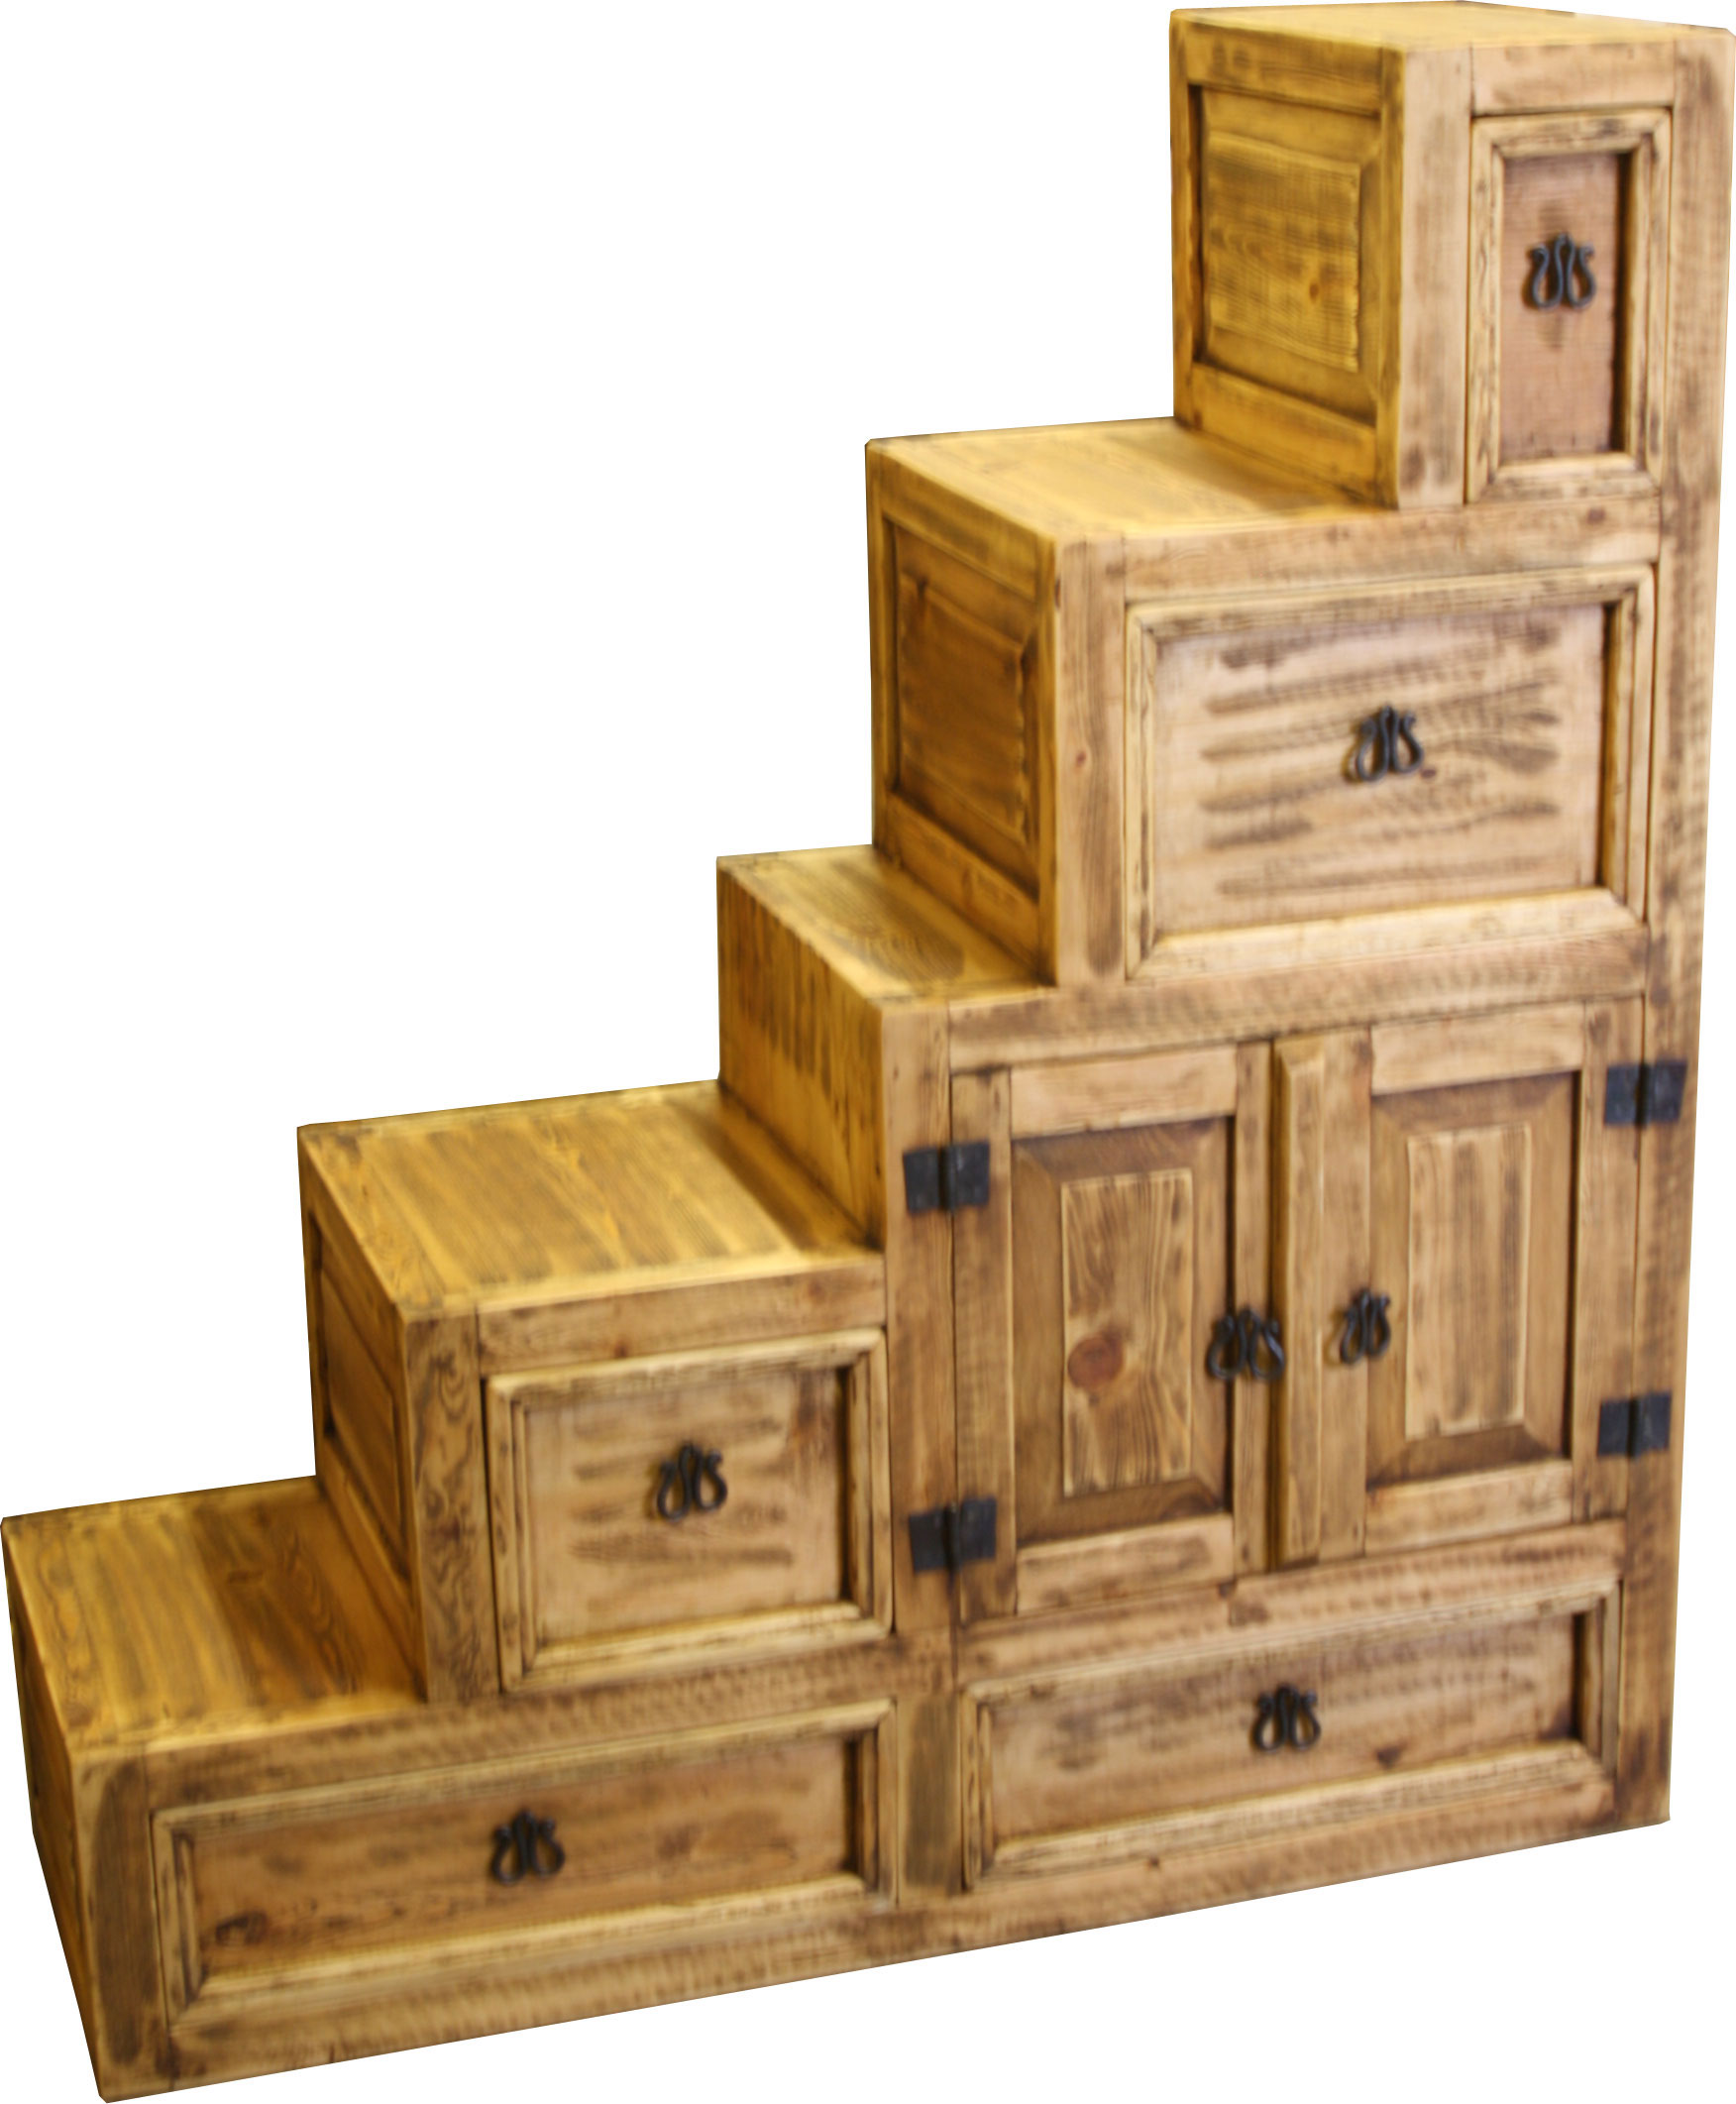 ... beautiful Mexican furniture 66 for your with Mexican furniture ... TJKCIVR